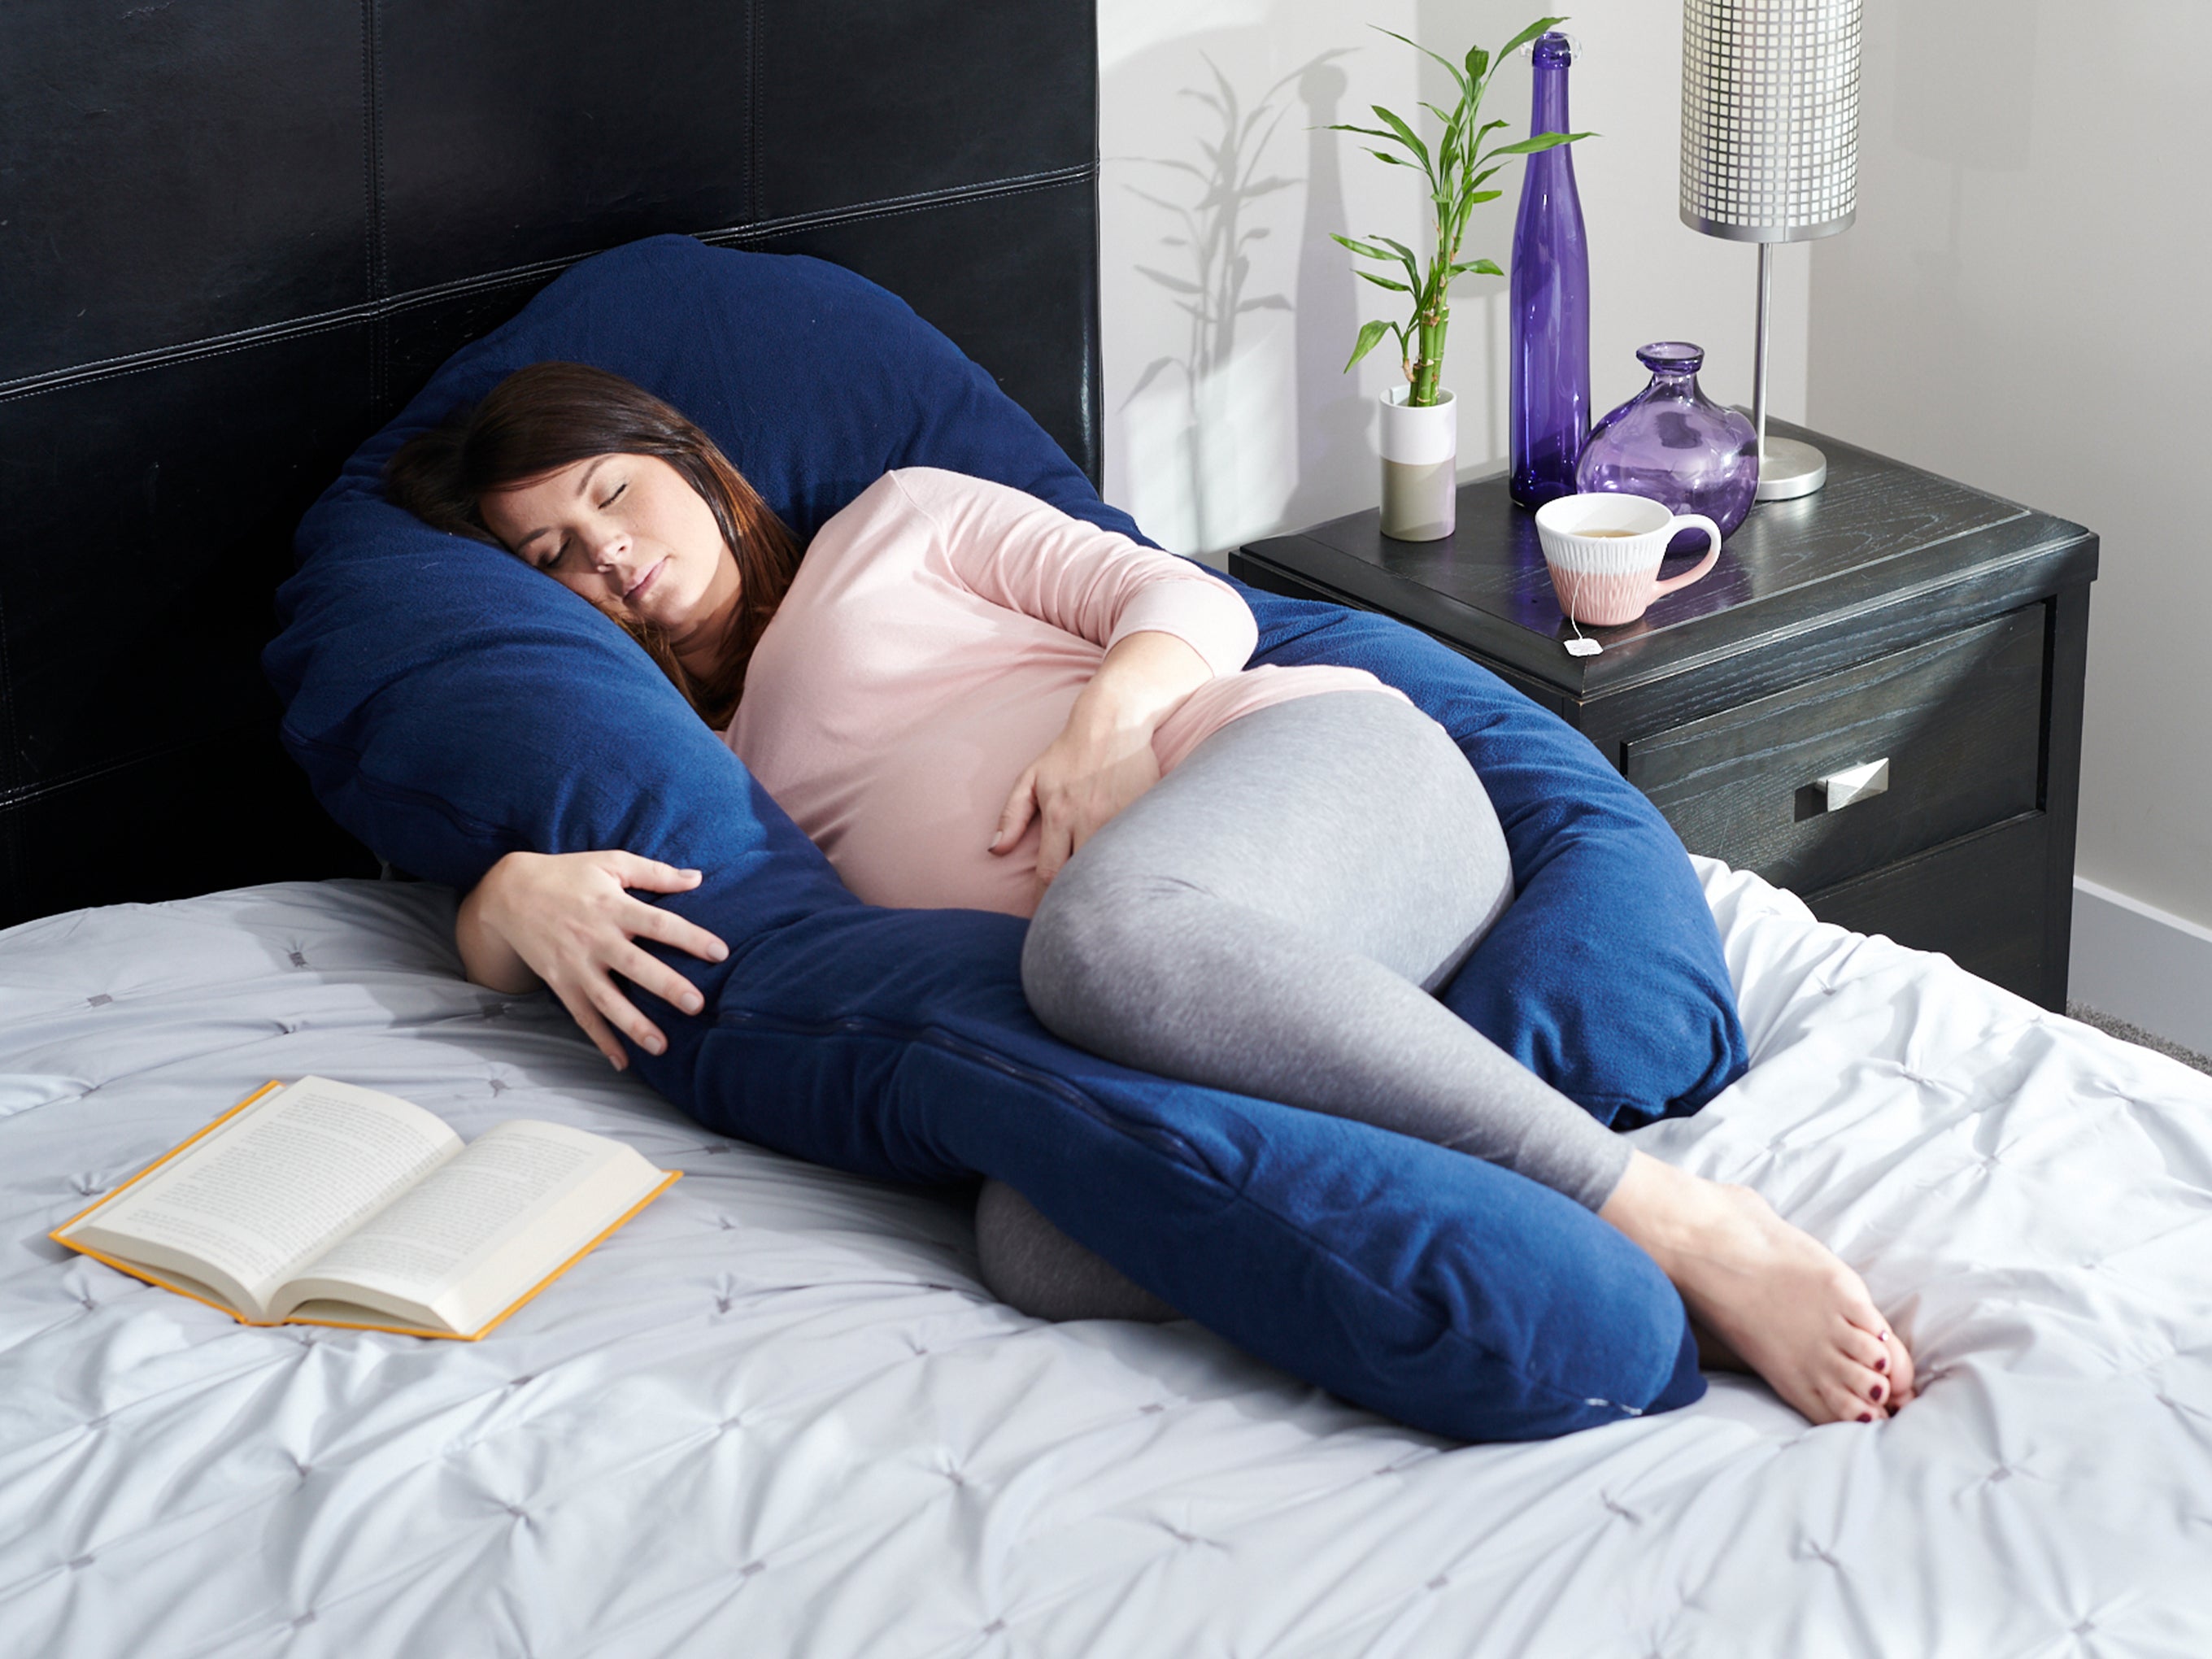 The Miraculous Knee Pillow That Side Sleepers Need